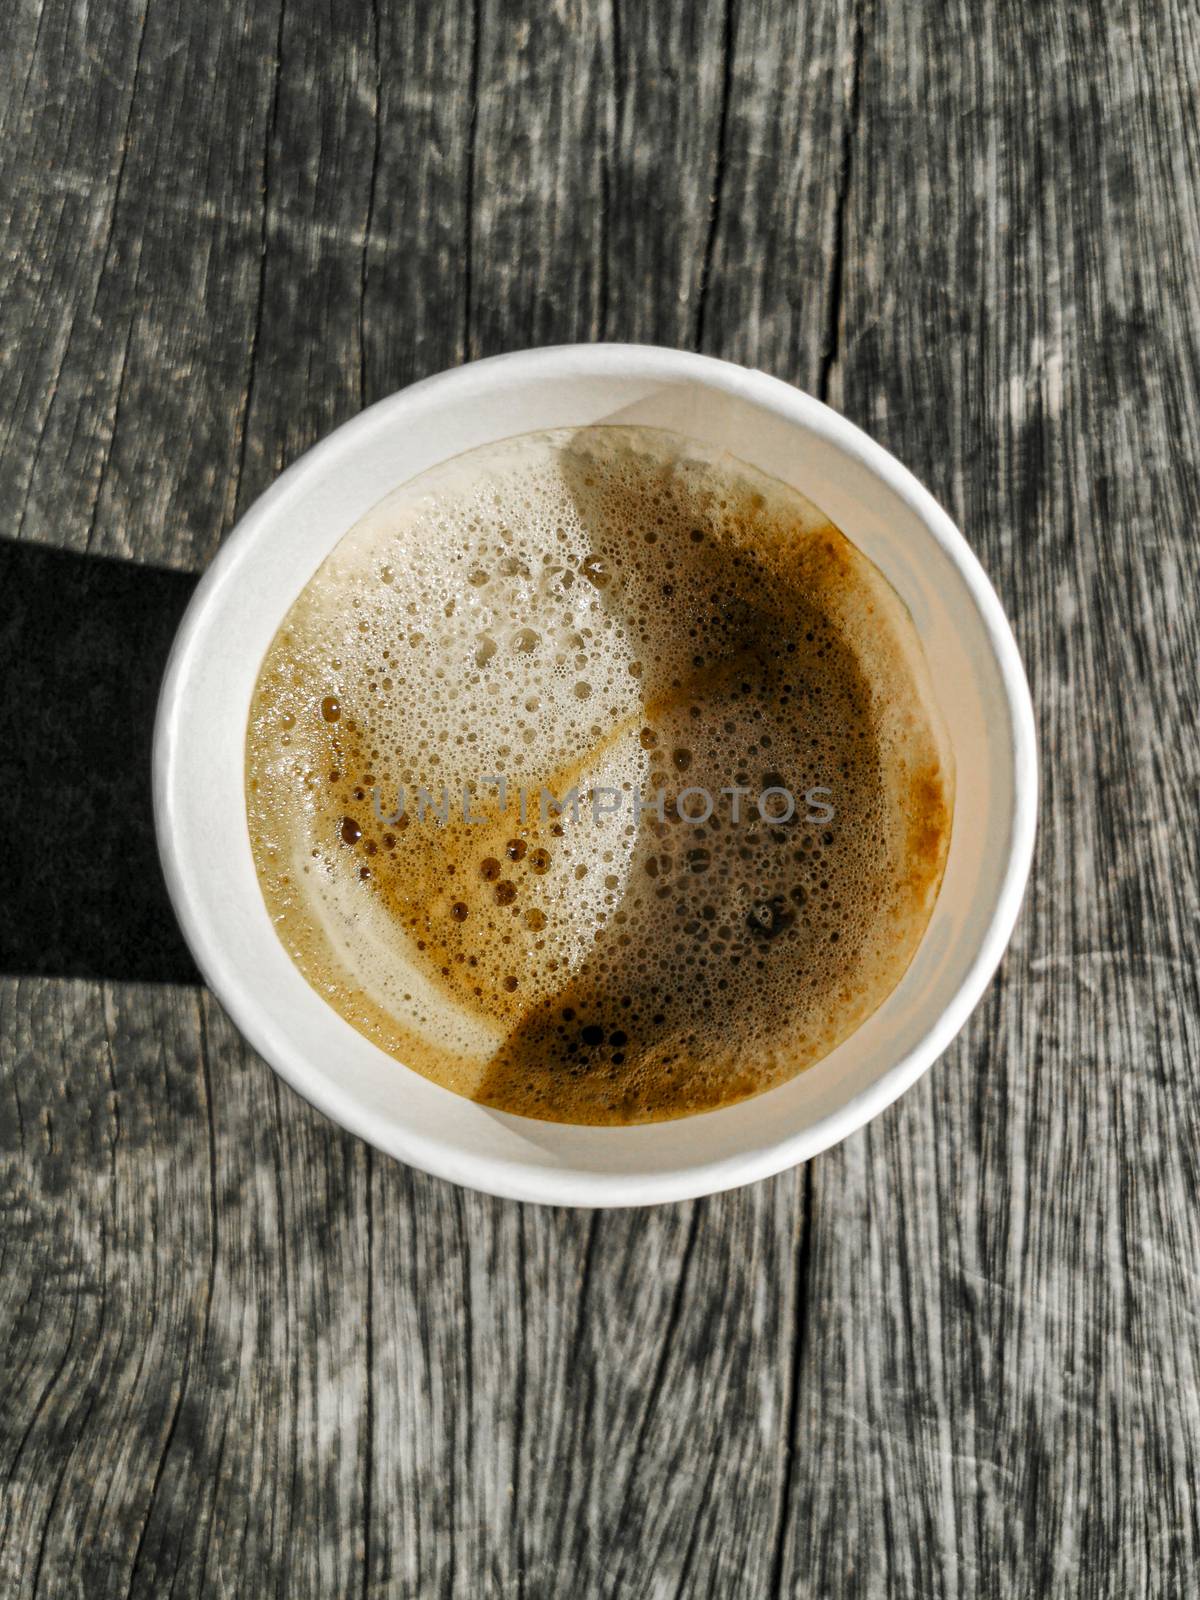 Paper cup with coffee to go on wooden ground texture from above. Leherheide, Bremerhaven.